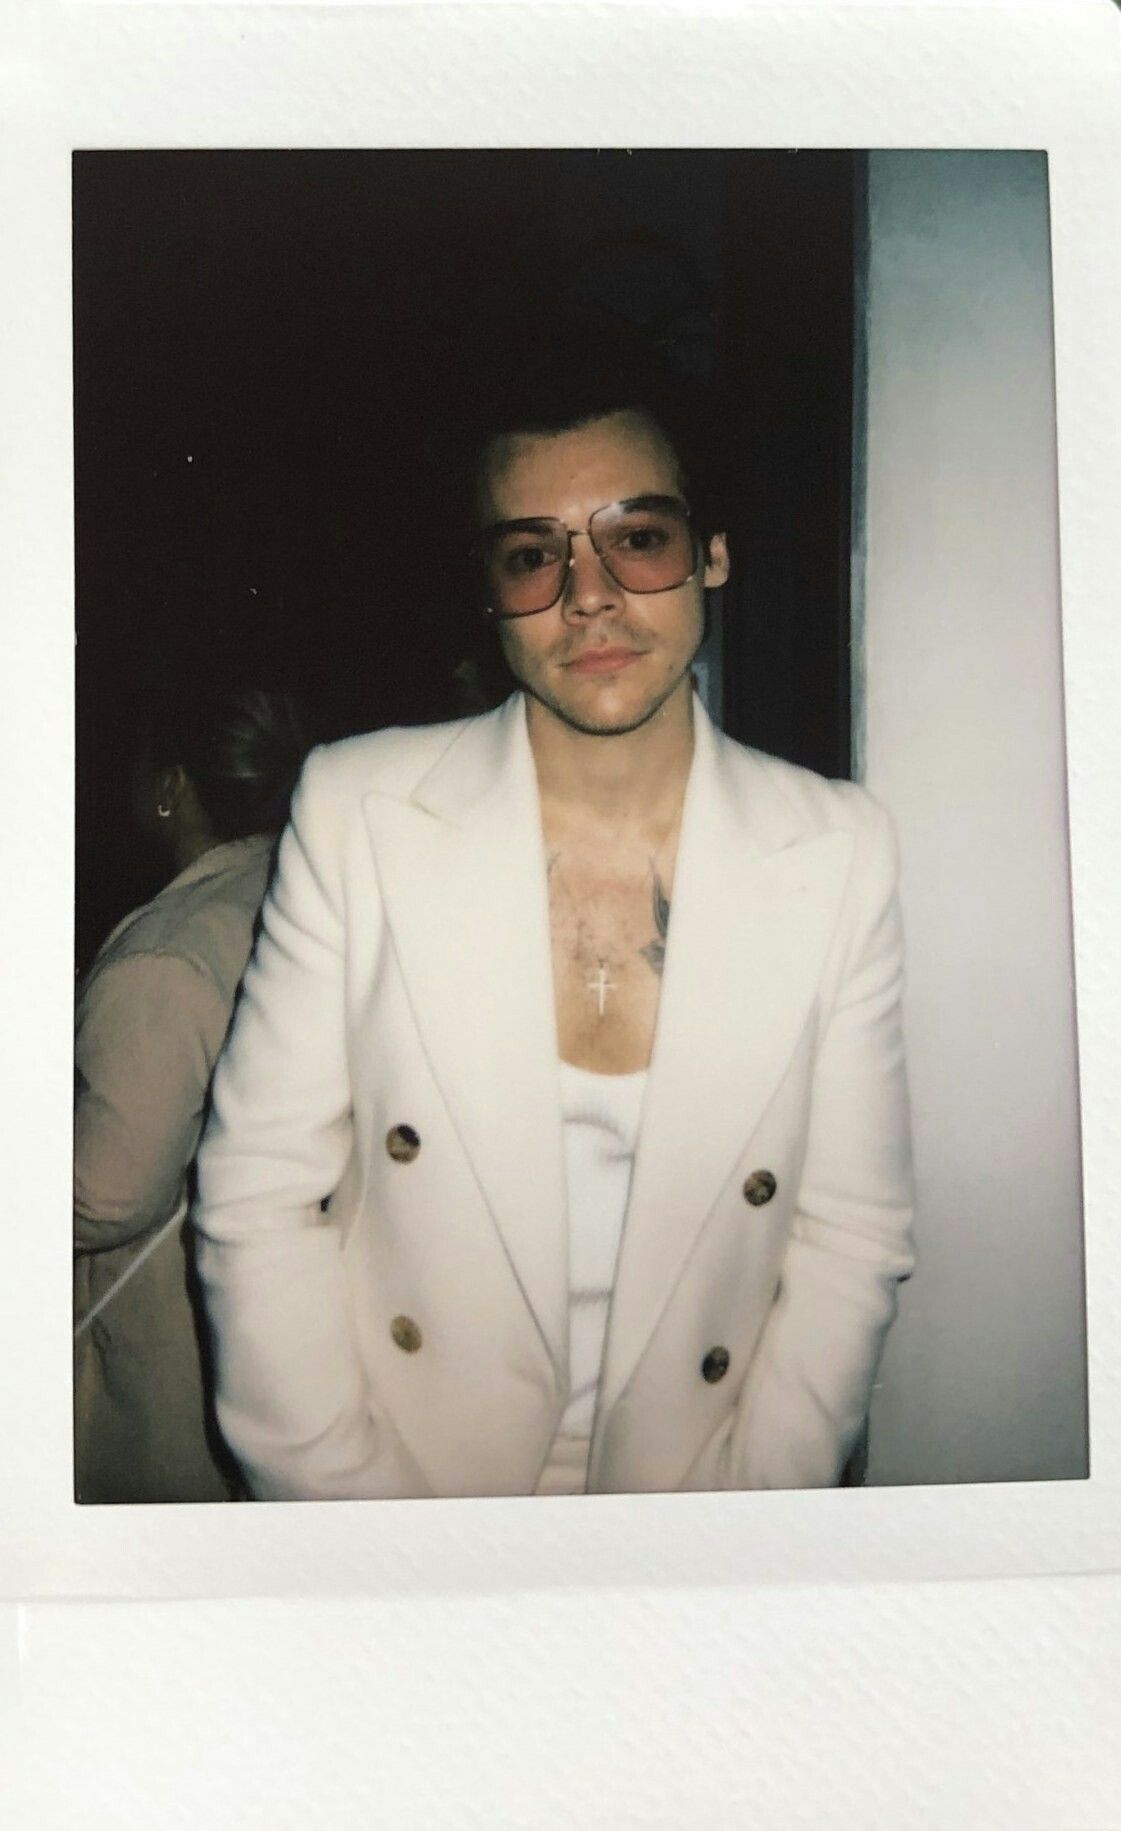 Gucci Cruise 2020. Harry styles, Style, Mr style